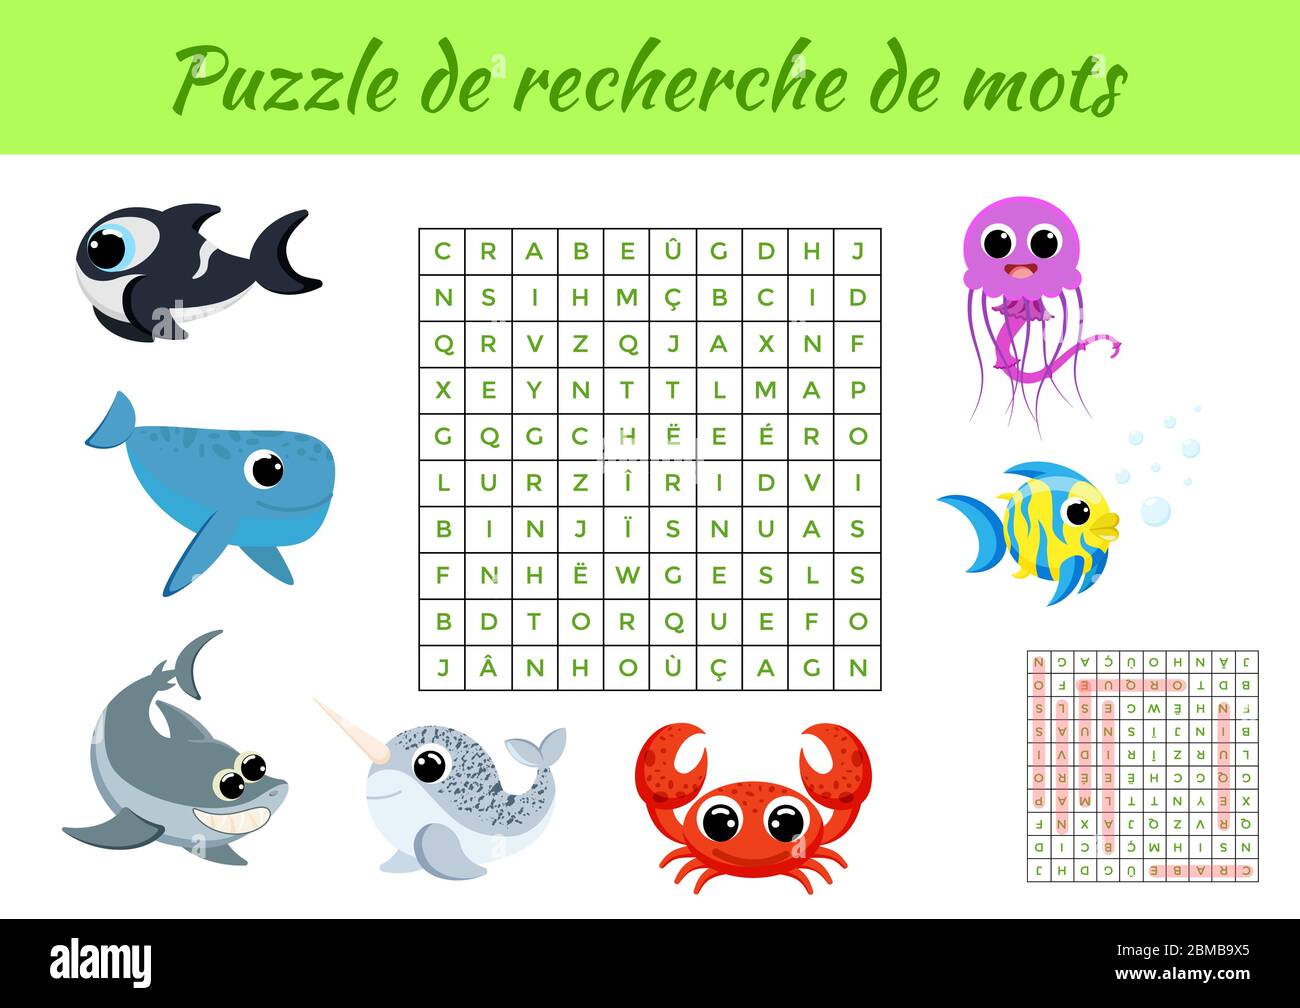 Puzzle de recherche de mots - Word search puzzle with pictures. Educational game for study French words. Activity worksheet colorful printable version Stock Vector